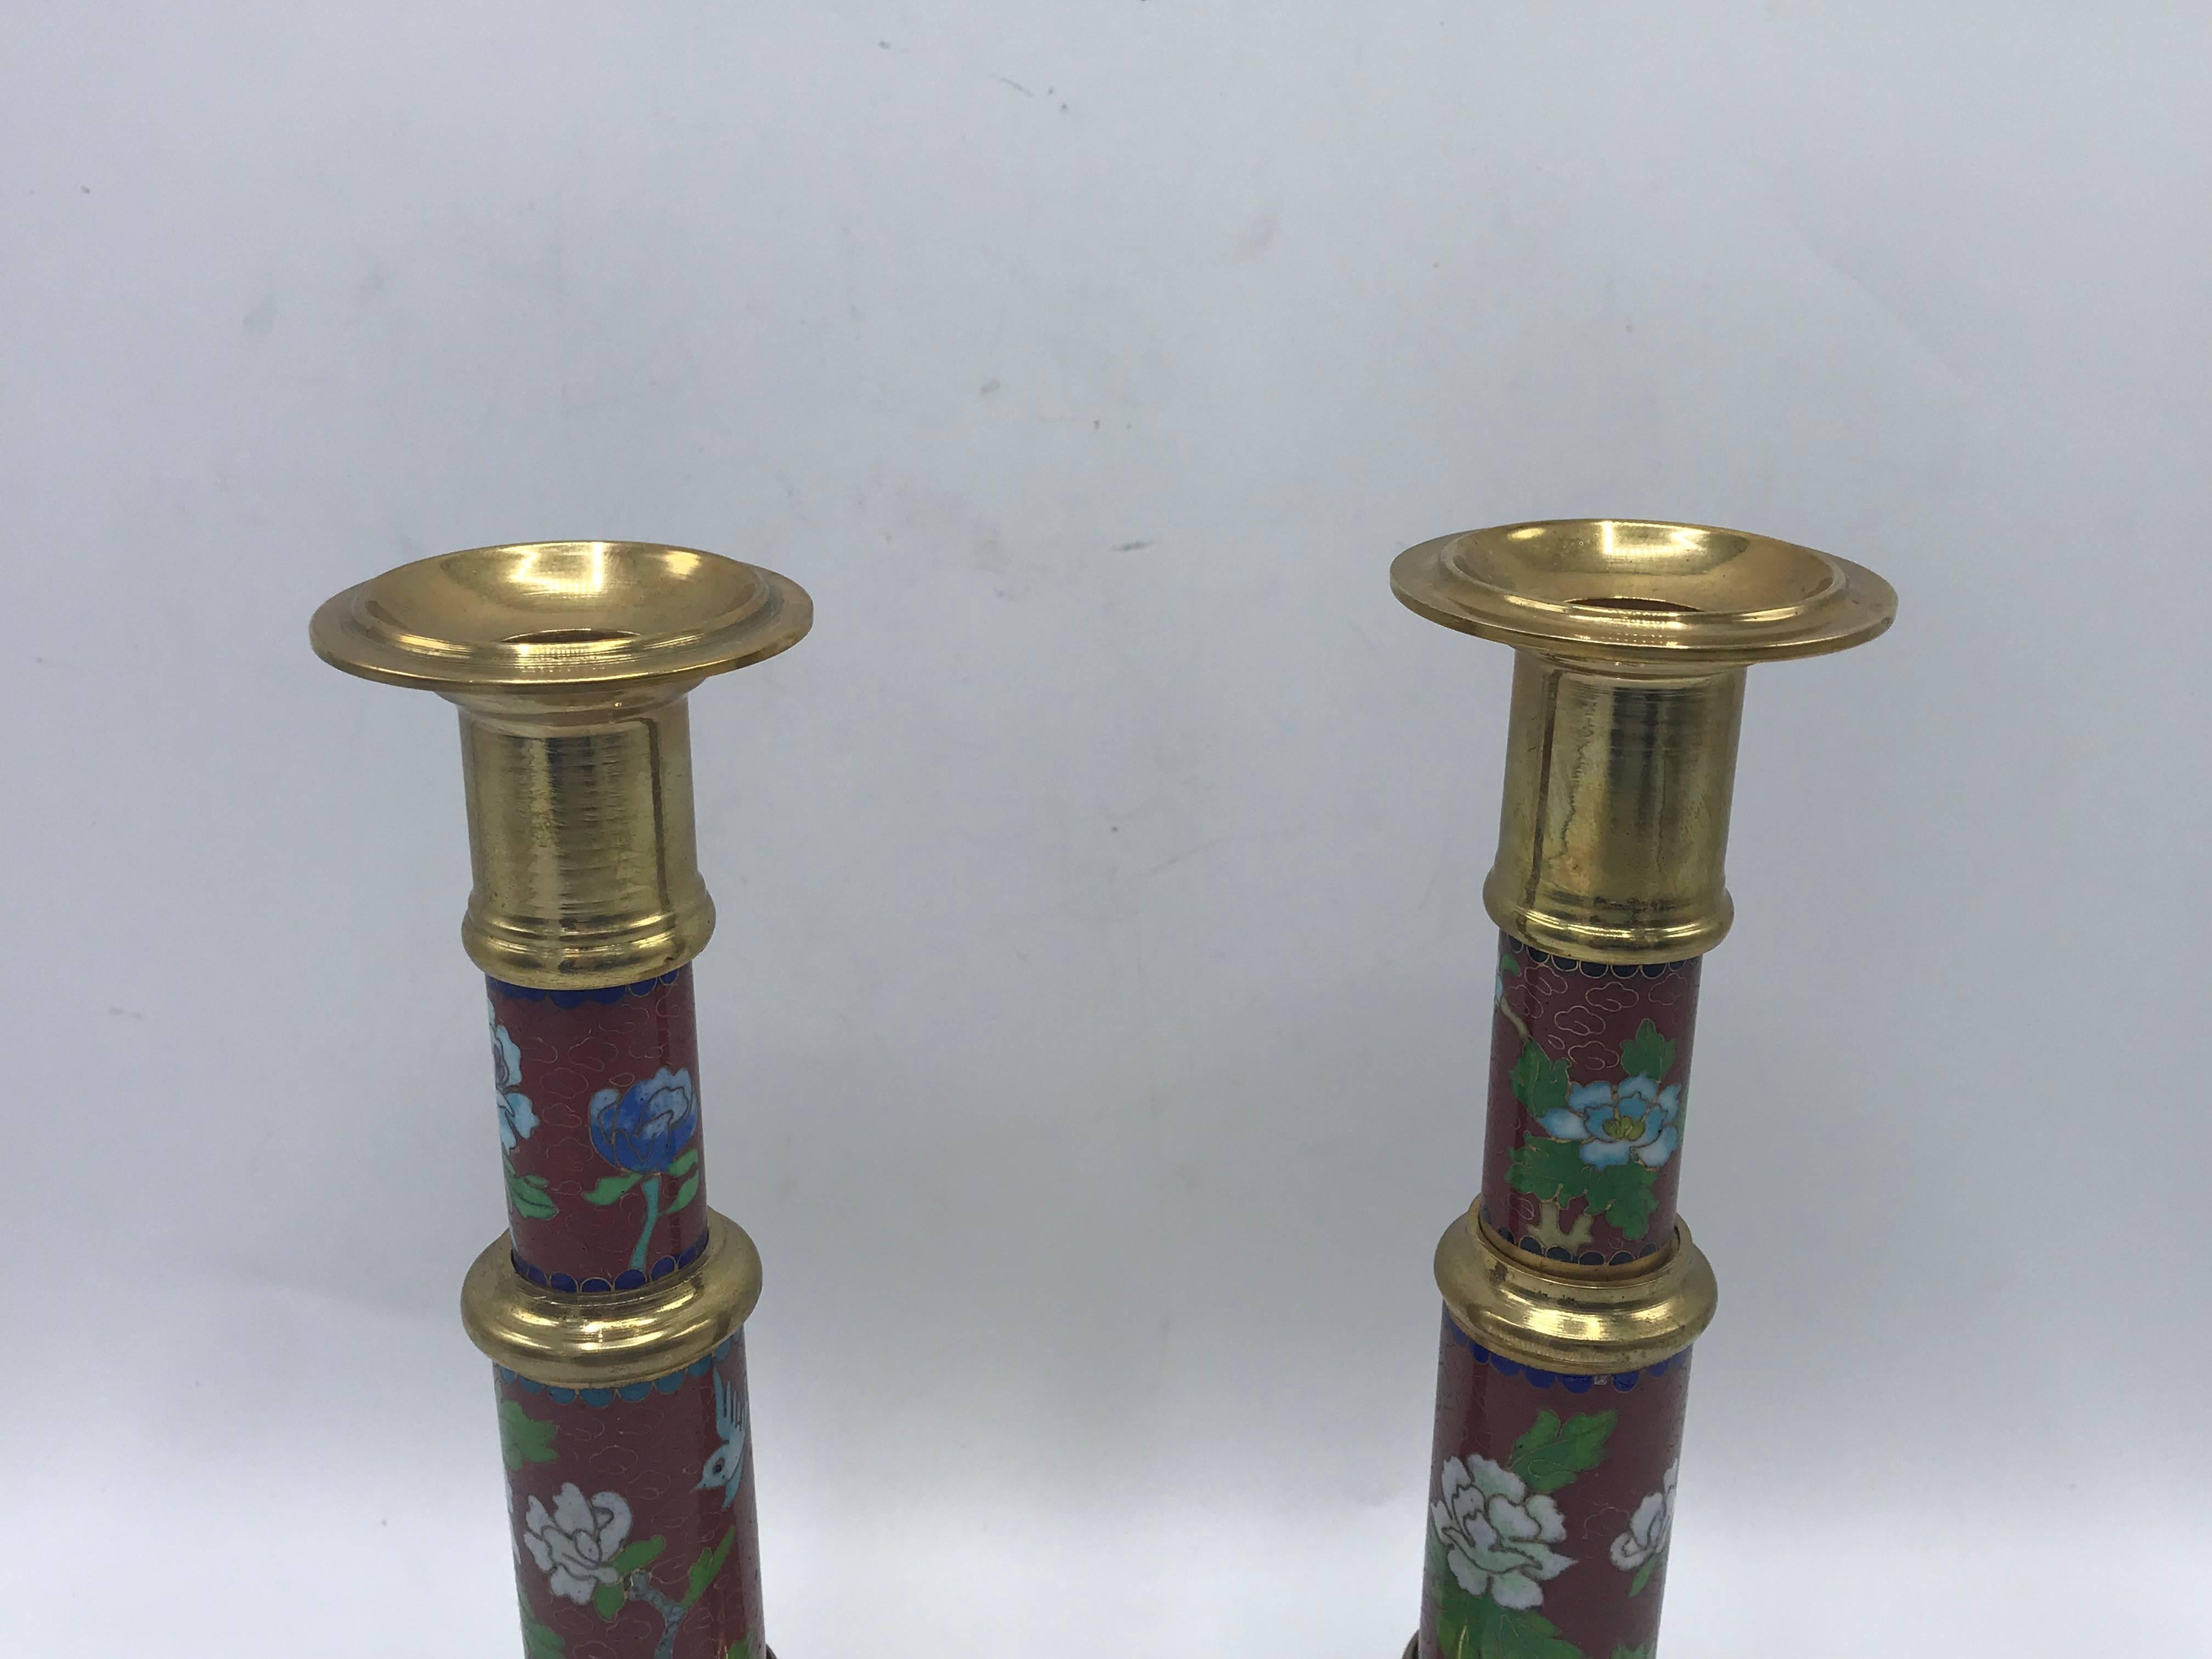 Listed is a beautiful, pair of 1960s Cloisonné candlesticks. Red and blue enamel with a mirrored floral motif on each. Holds a standard, round candlestick. Heavy.